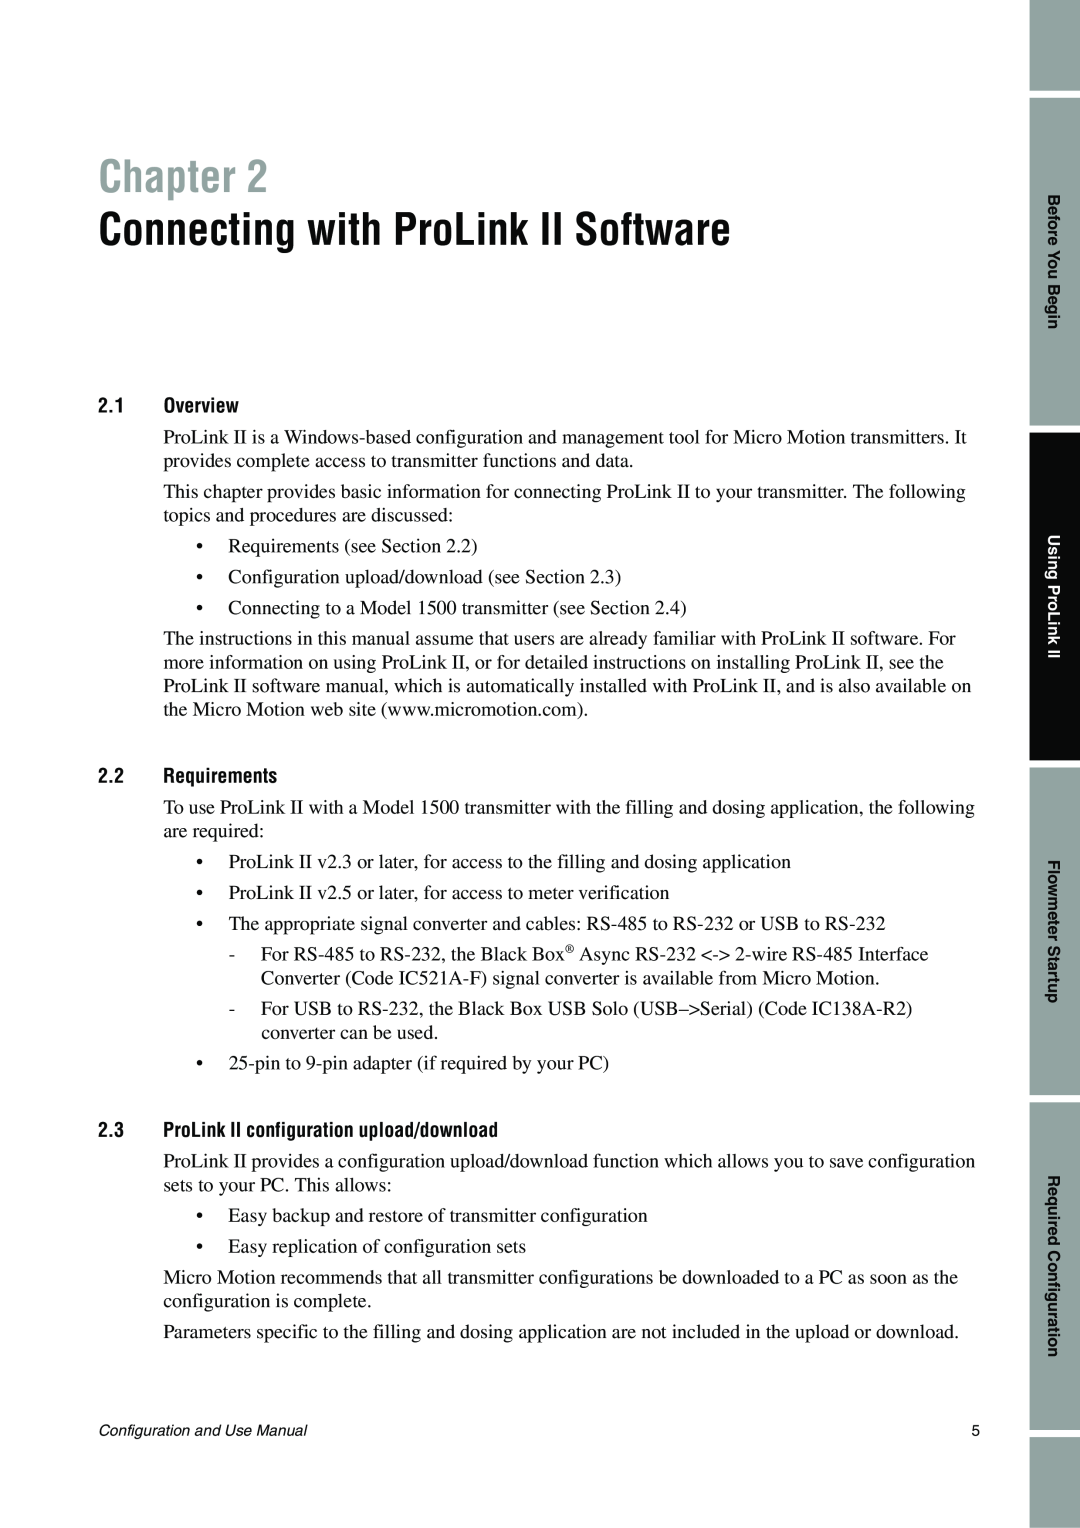 Emerson Process Management 1500 manual Connecting with ProLink II Software, Chapter, 2.1Overview, 2.2Requirements 